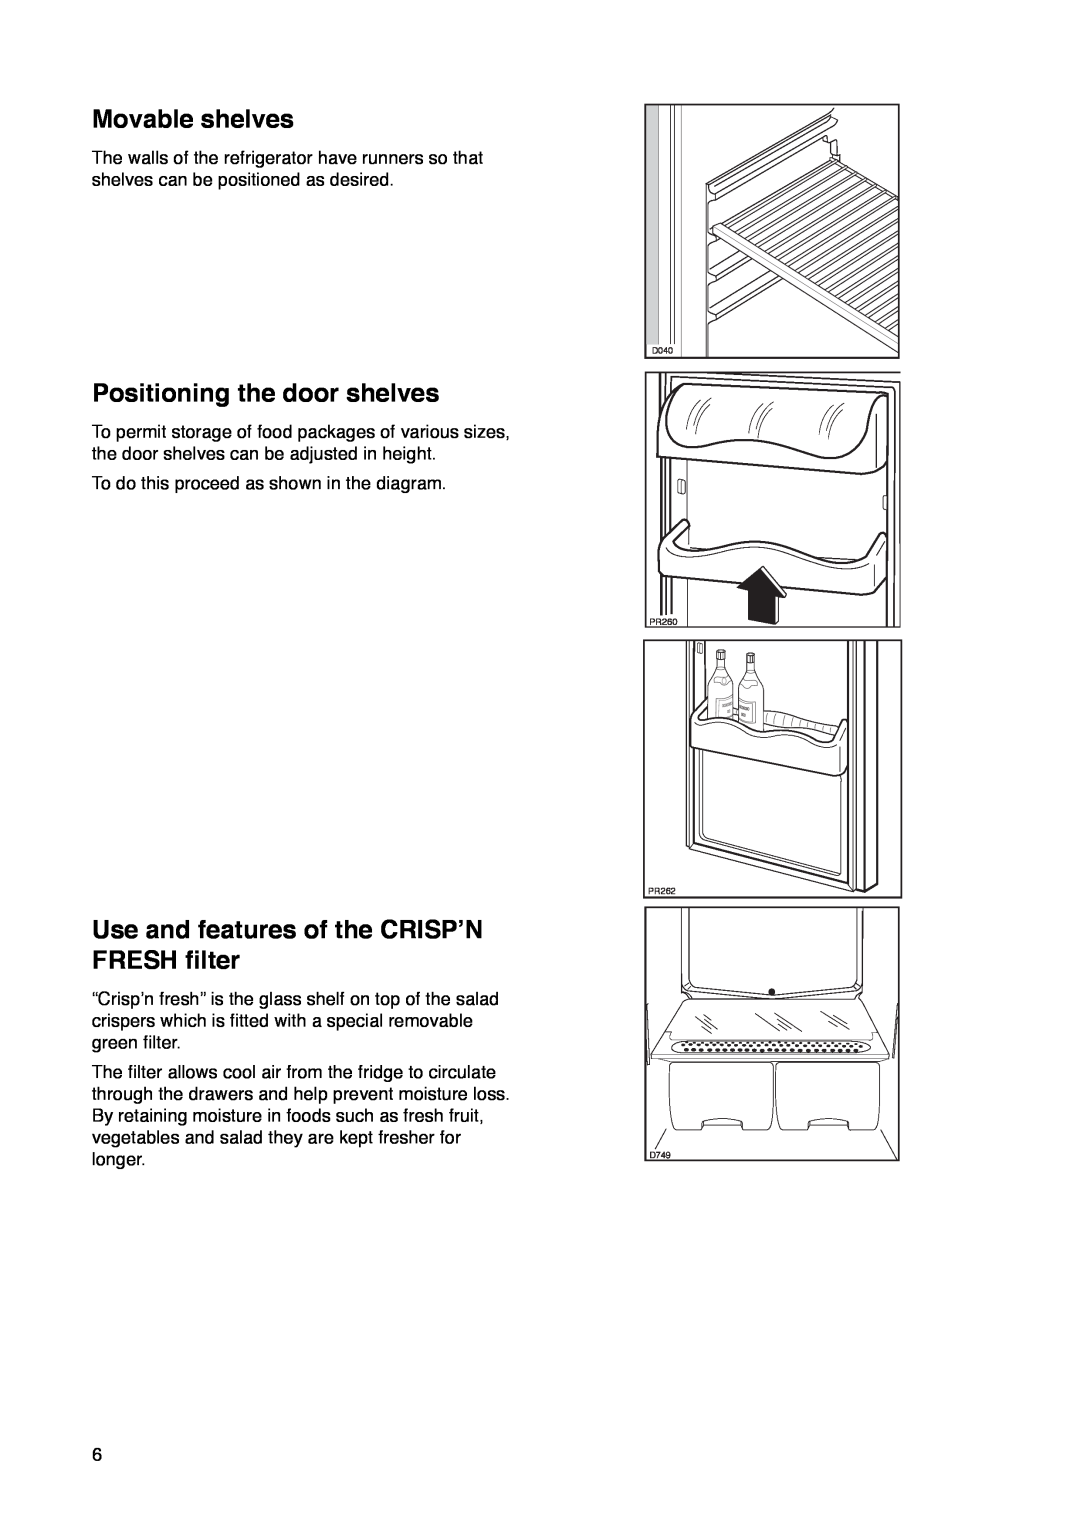 Zanussi ZCR 85 L manual Movable shelves, Positioning the door shelves, Use and features of the CRISPÕN FRESH filter 